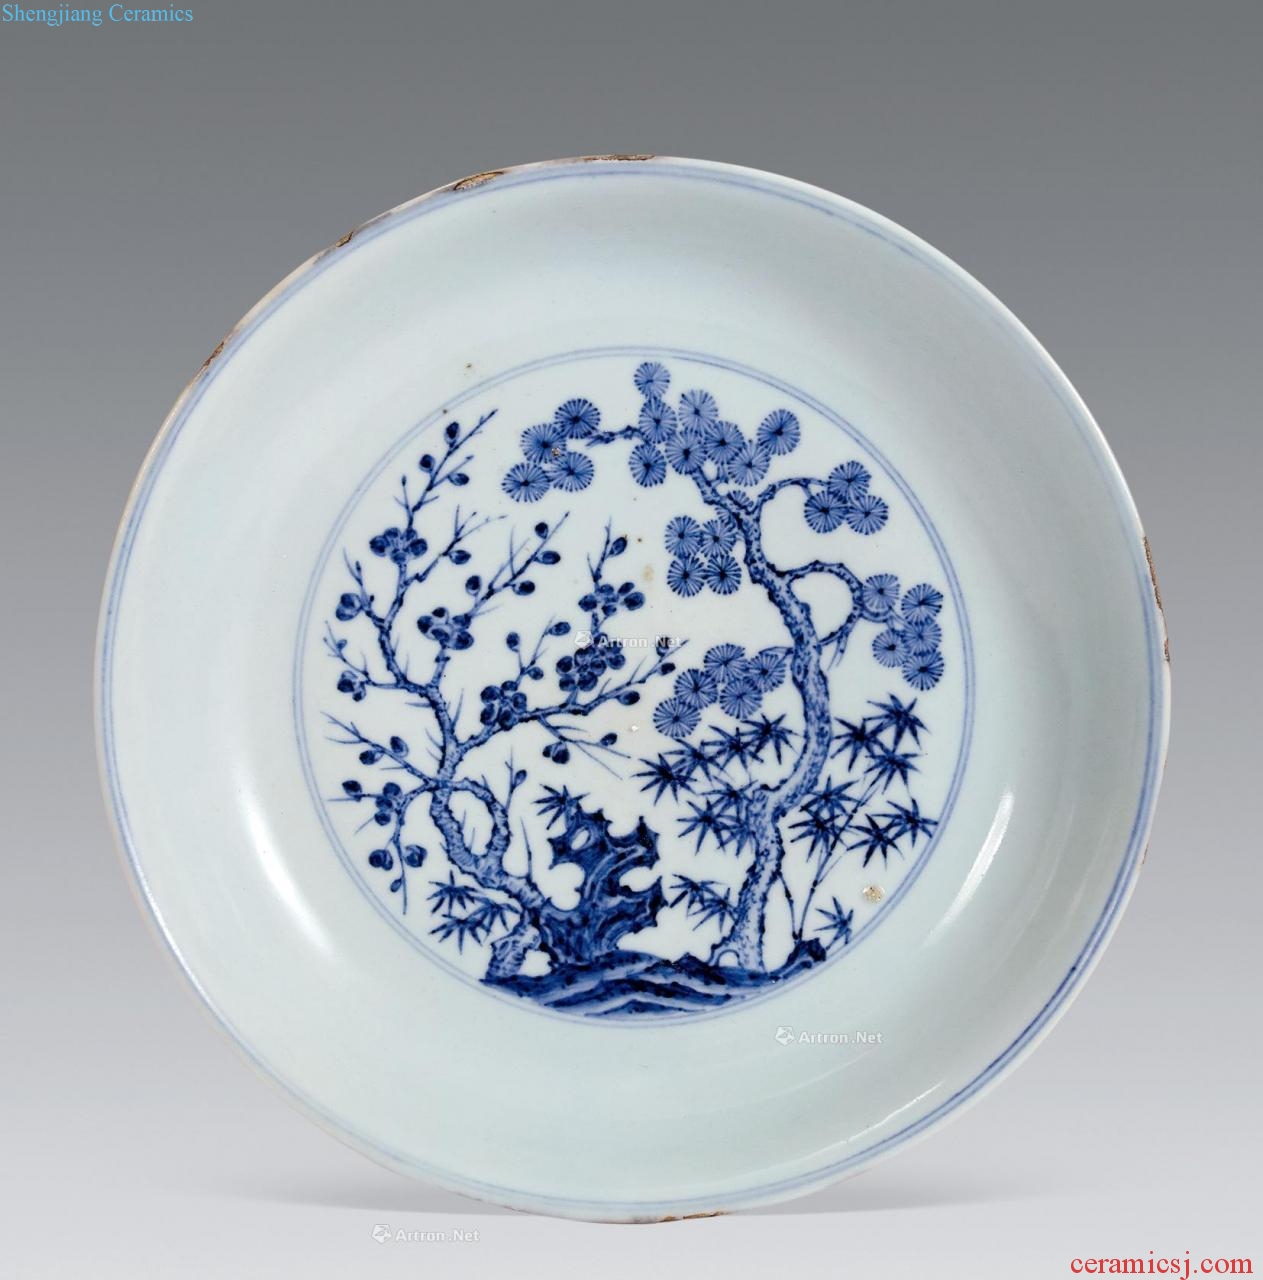 In the Ming dynasty Blue and white, poetic figure